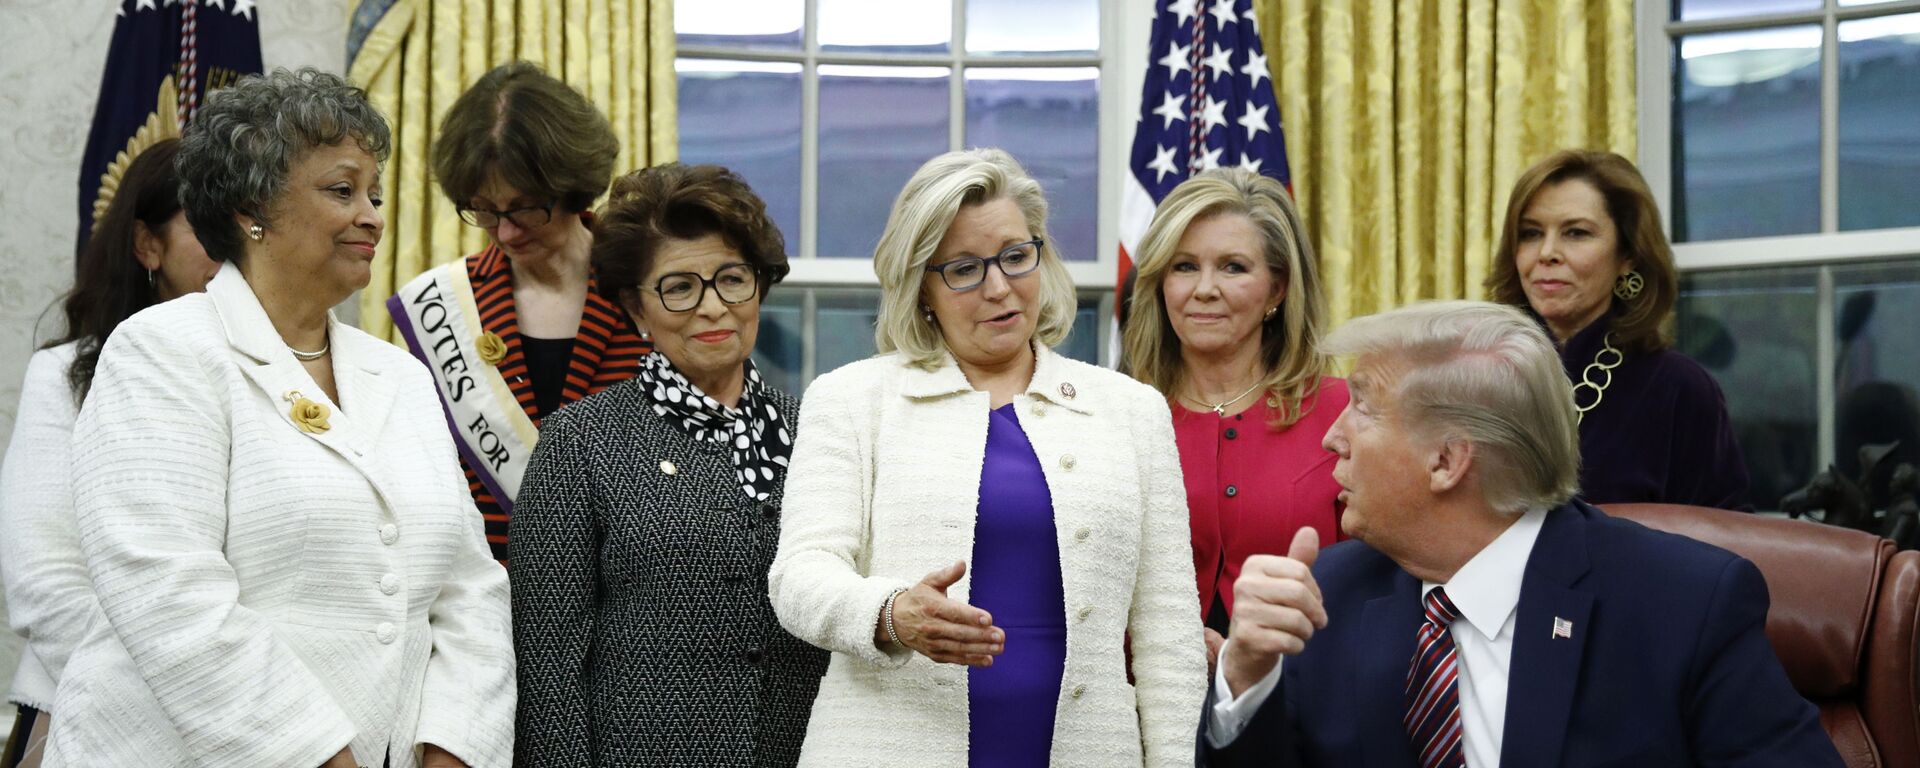 Rep. Liz Cheney, R-Wyo., center, speaks with President Donald Trump during a bill signing ceremony for the Women's Suffrage Centennial Commemorative Coin Act in the Oval Office of the White House, Monday, Nov. 25, 2019, in Washington. - Sputnik International, 1920, 04.12.2023